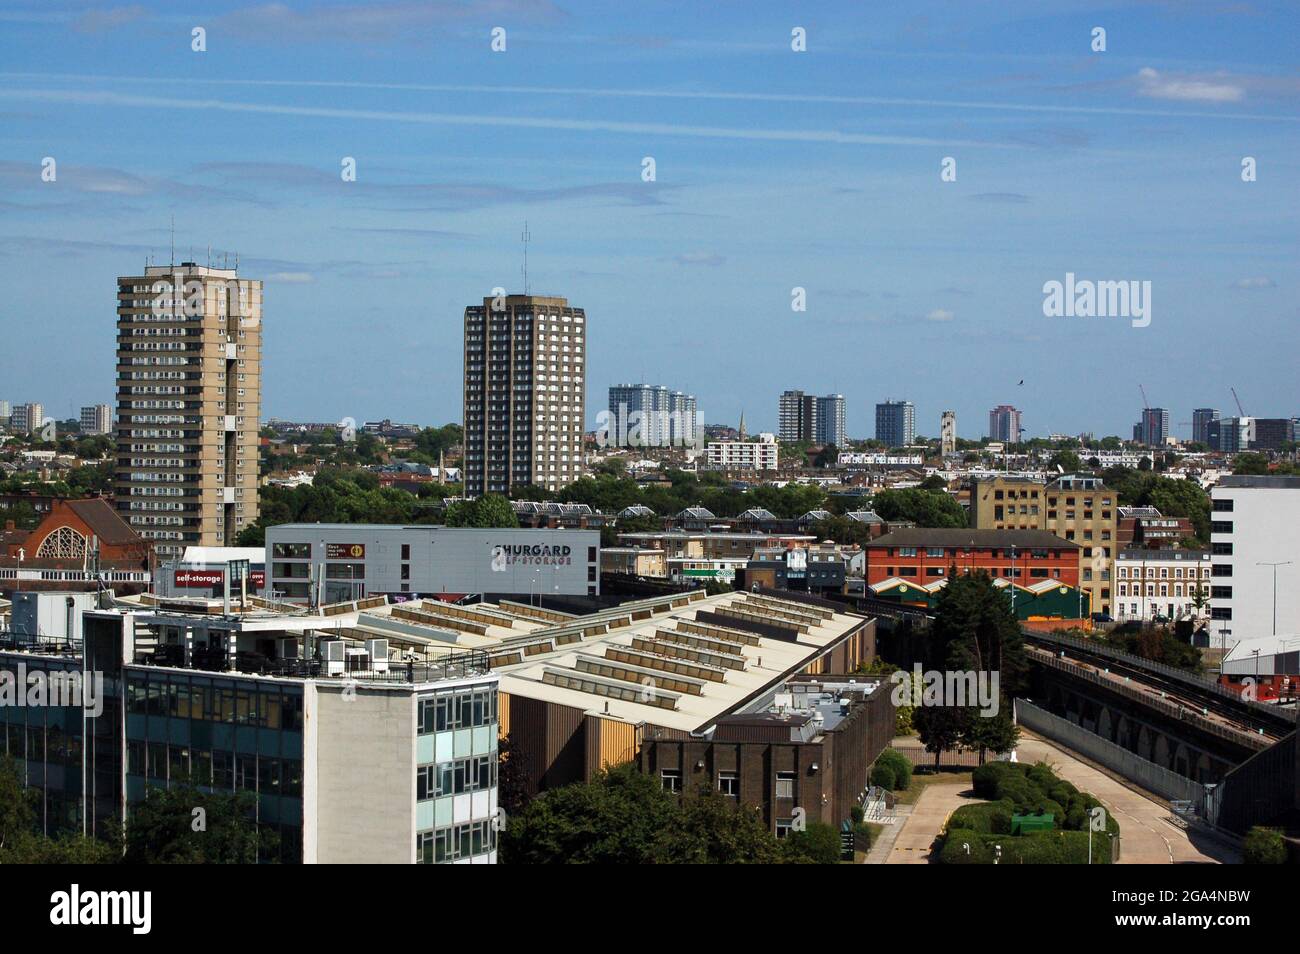 London, UK - August 23, 2009: View across Shepherd's Bush and North Kensington with the tragic Grenfell Tower block of flats (second from left) before Stock Photo